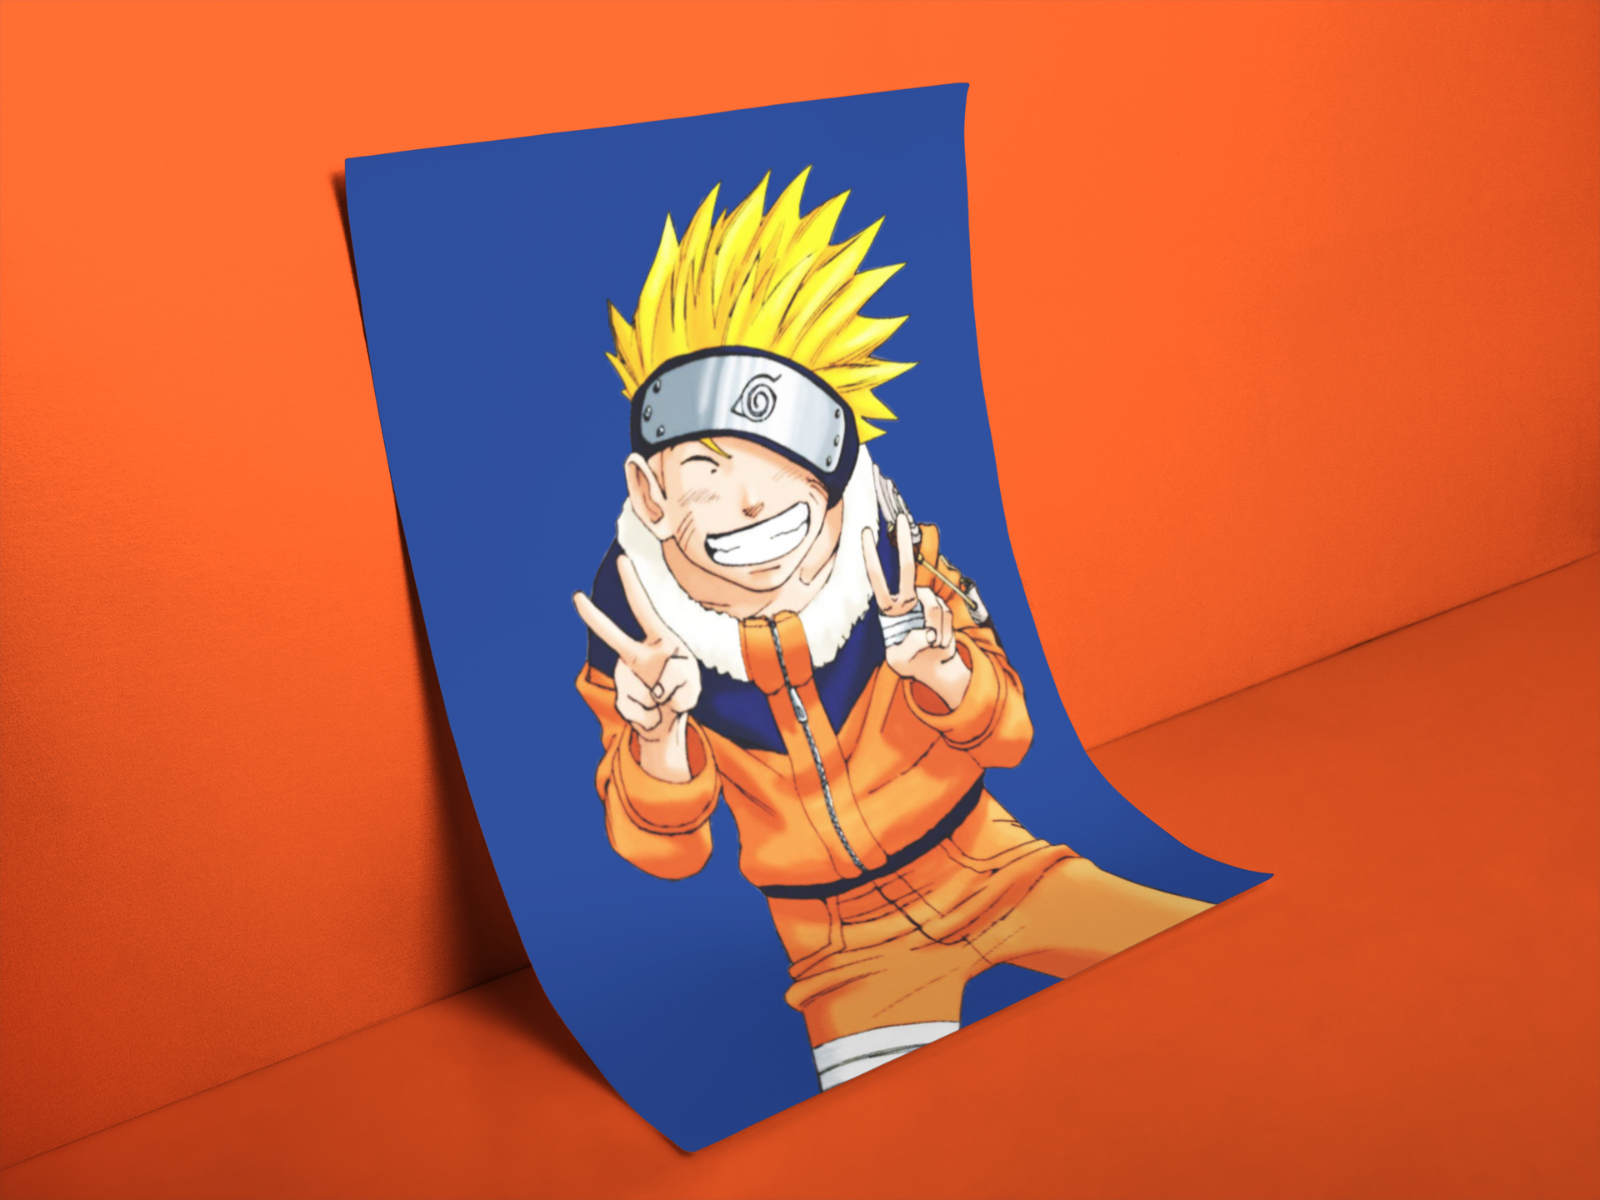 Naruto Shippuden. Poster x 10 Foamboard Backed to Mount Wall